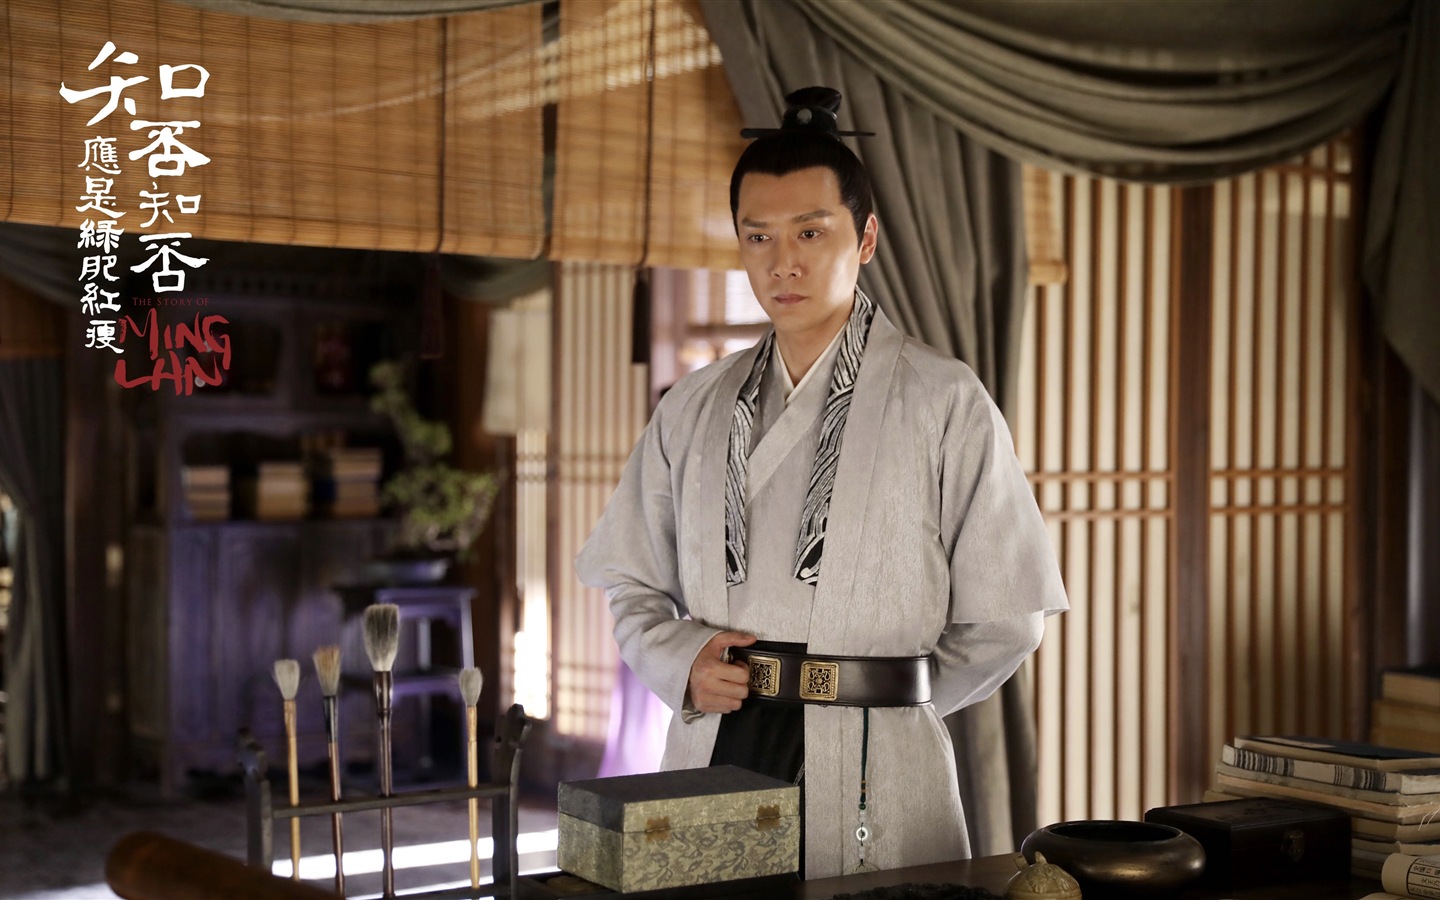 The Story Of MingLan, TV series HD wallpapers #49 - 1440x900